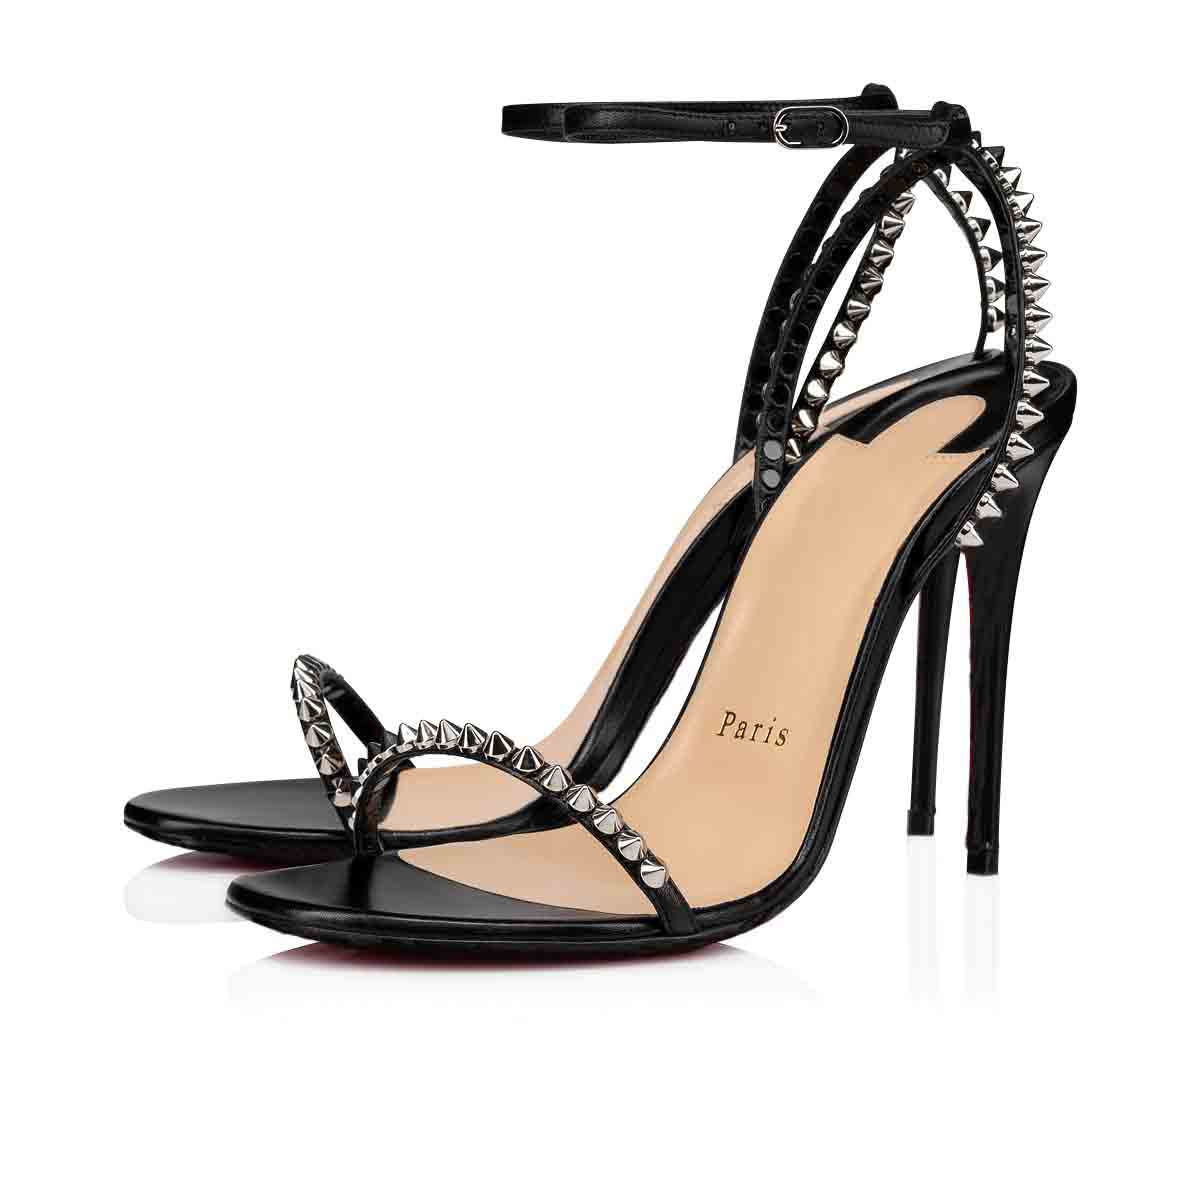 

New Summer Lofty Heels Lady Sexy Sandals So Me Spiked Black Nuede Veau Velours Leather,Cool Ankle Strap Women Wedding Party Dress Shoes